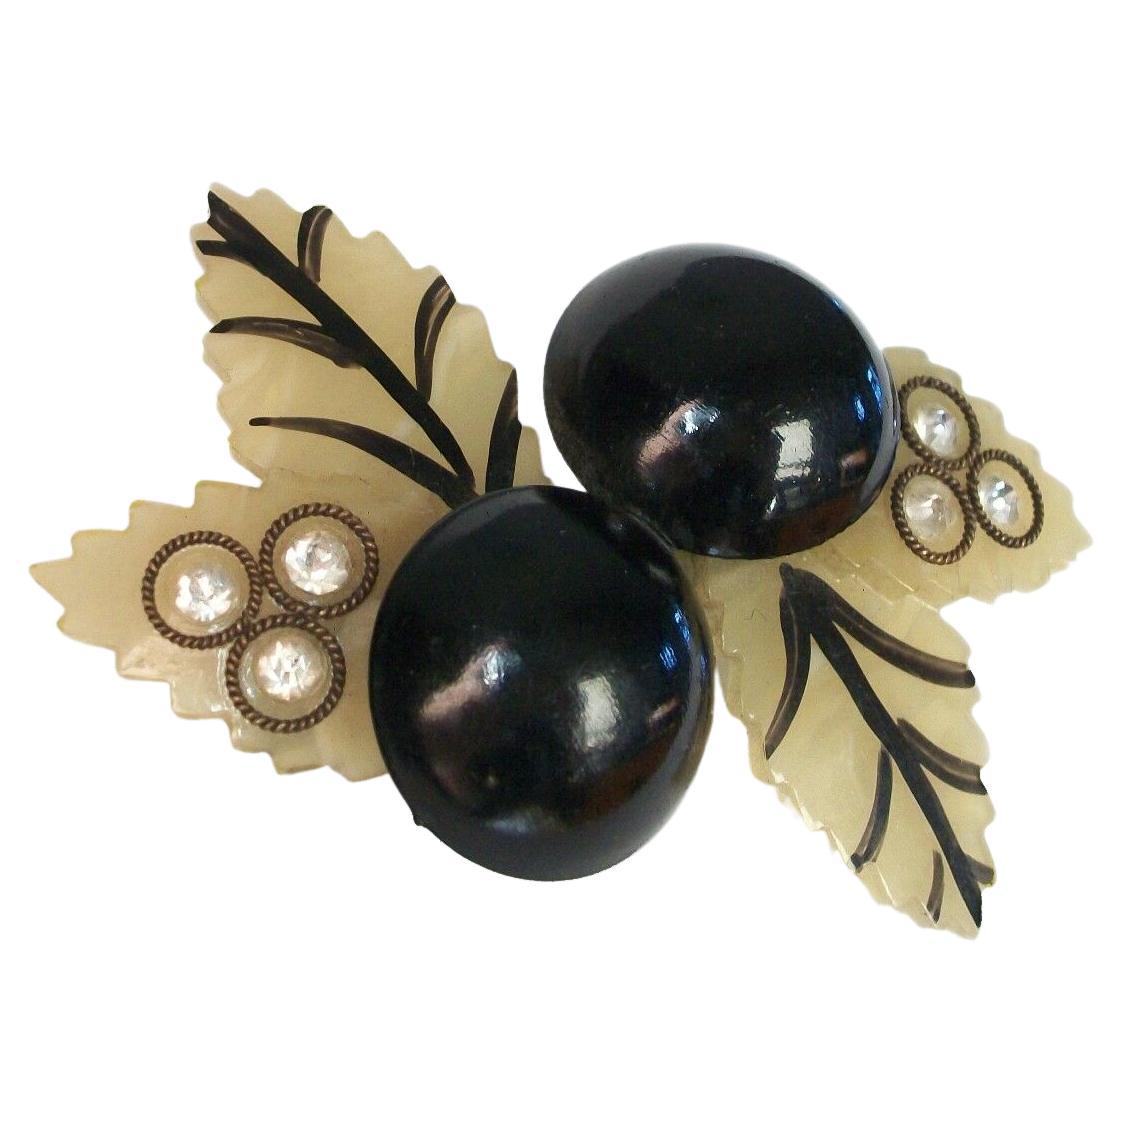 Art Deco Celluloid 'Black Cherry' Brooch with Rhinestones, Unsigned, circa 1930s